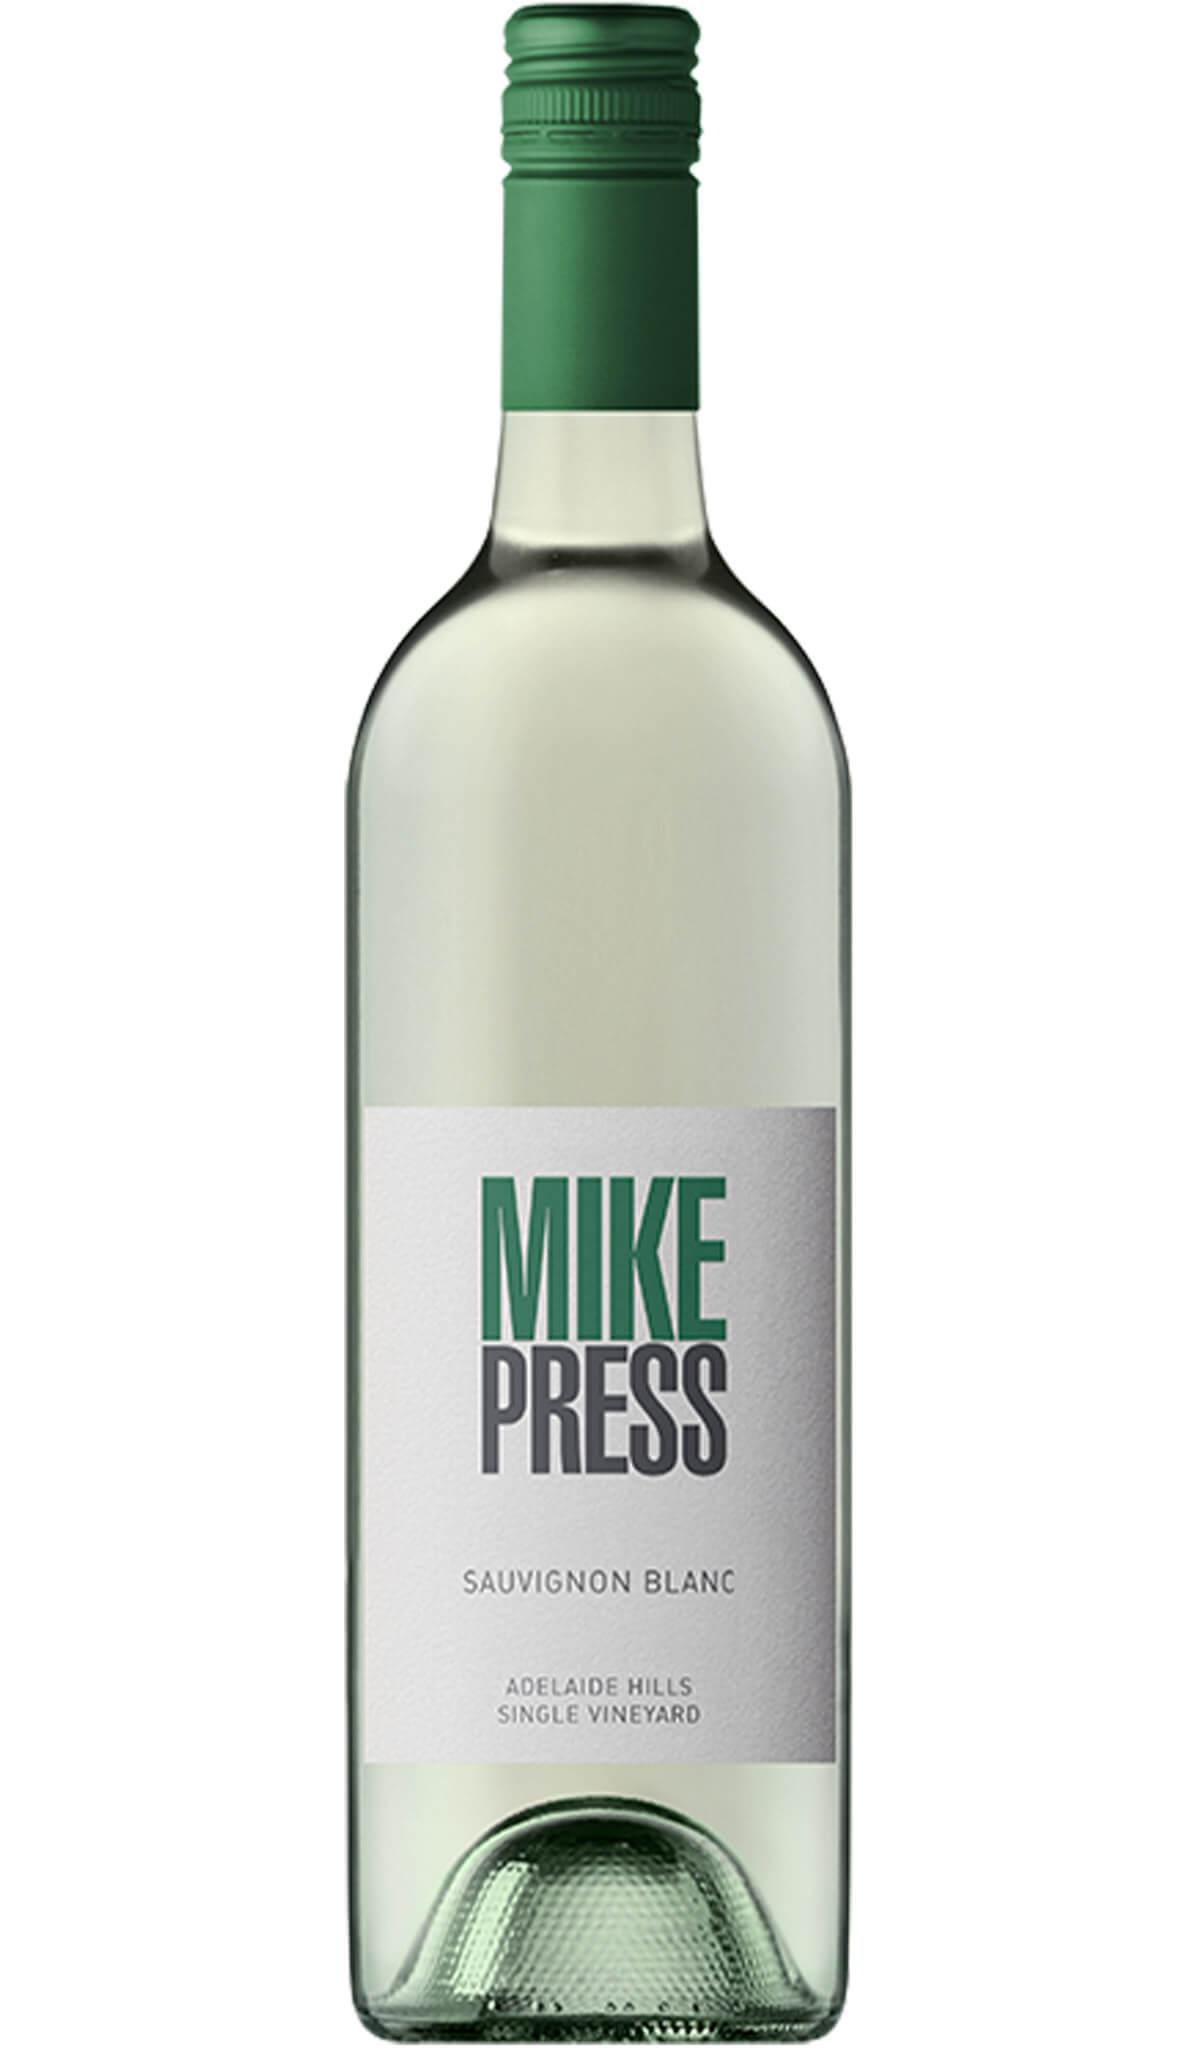 Find out more or buy Mike Press Sauvignon Blanc 2023 (Adelaide Hills) online at Wine Sellers Direct - Australia’s independent liquor specialists.